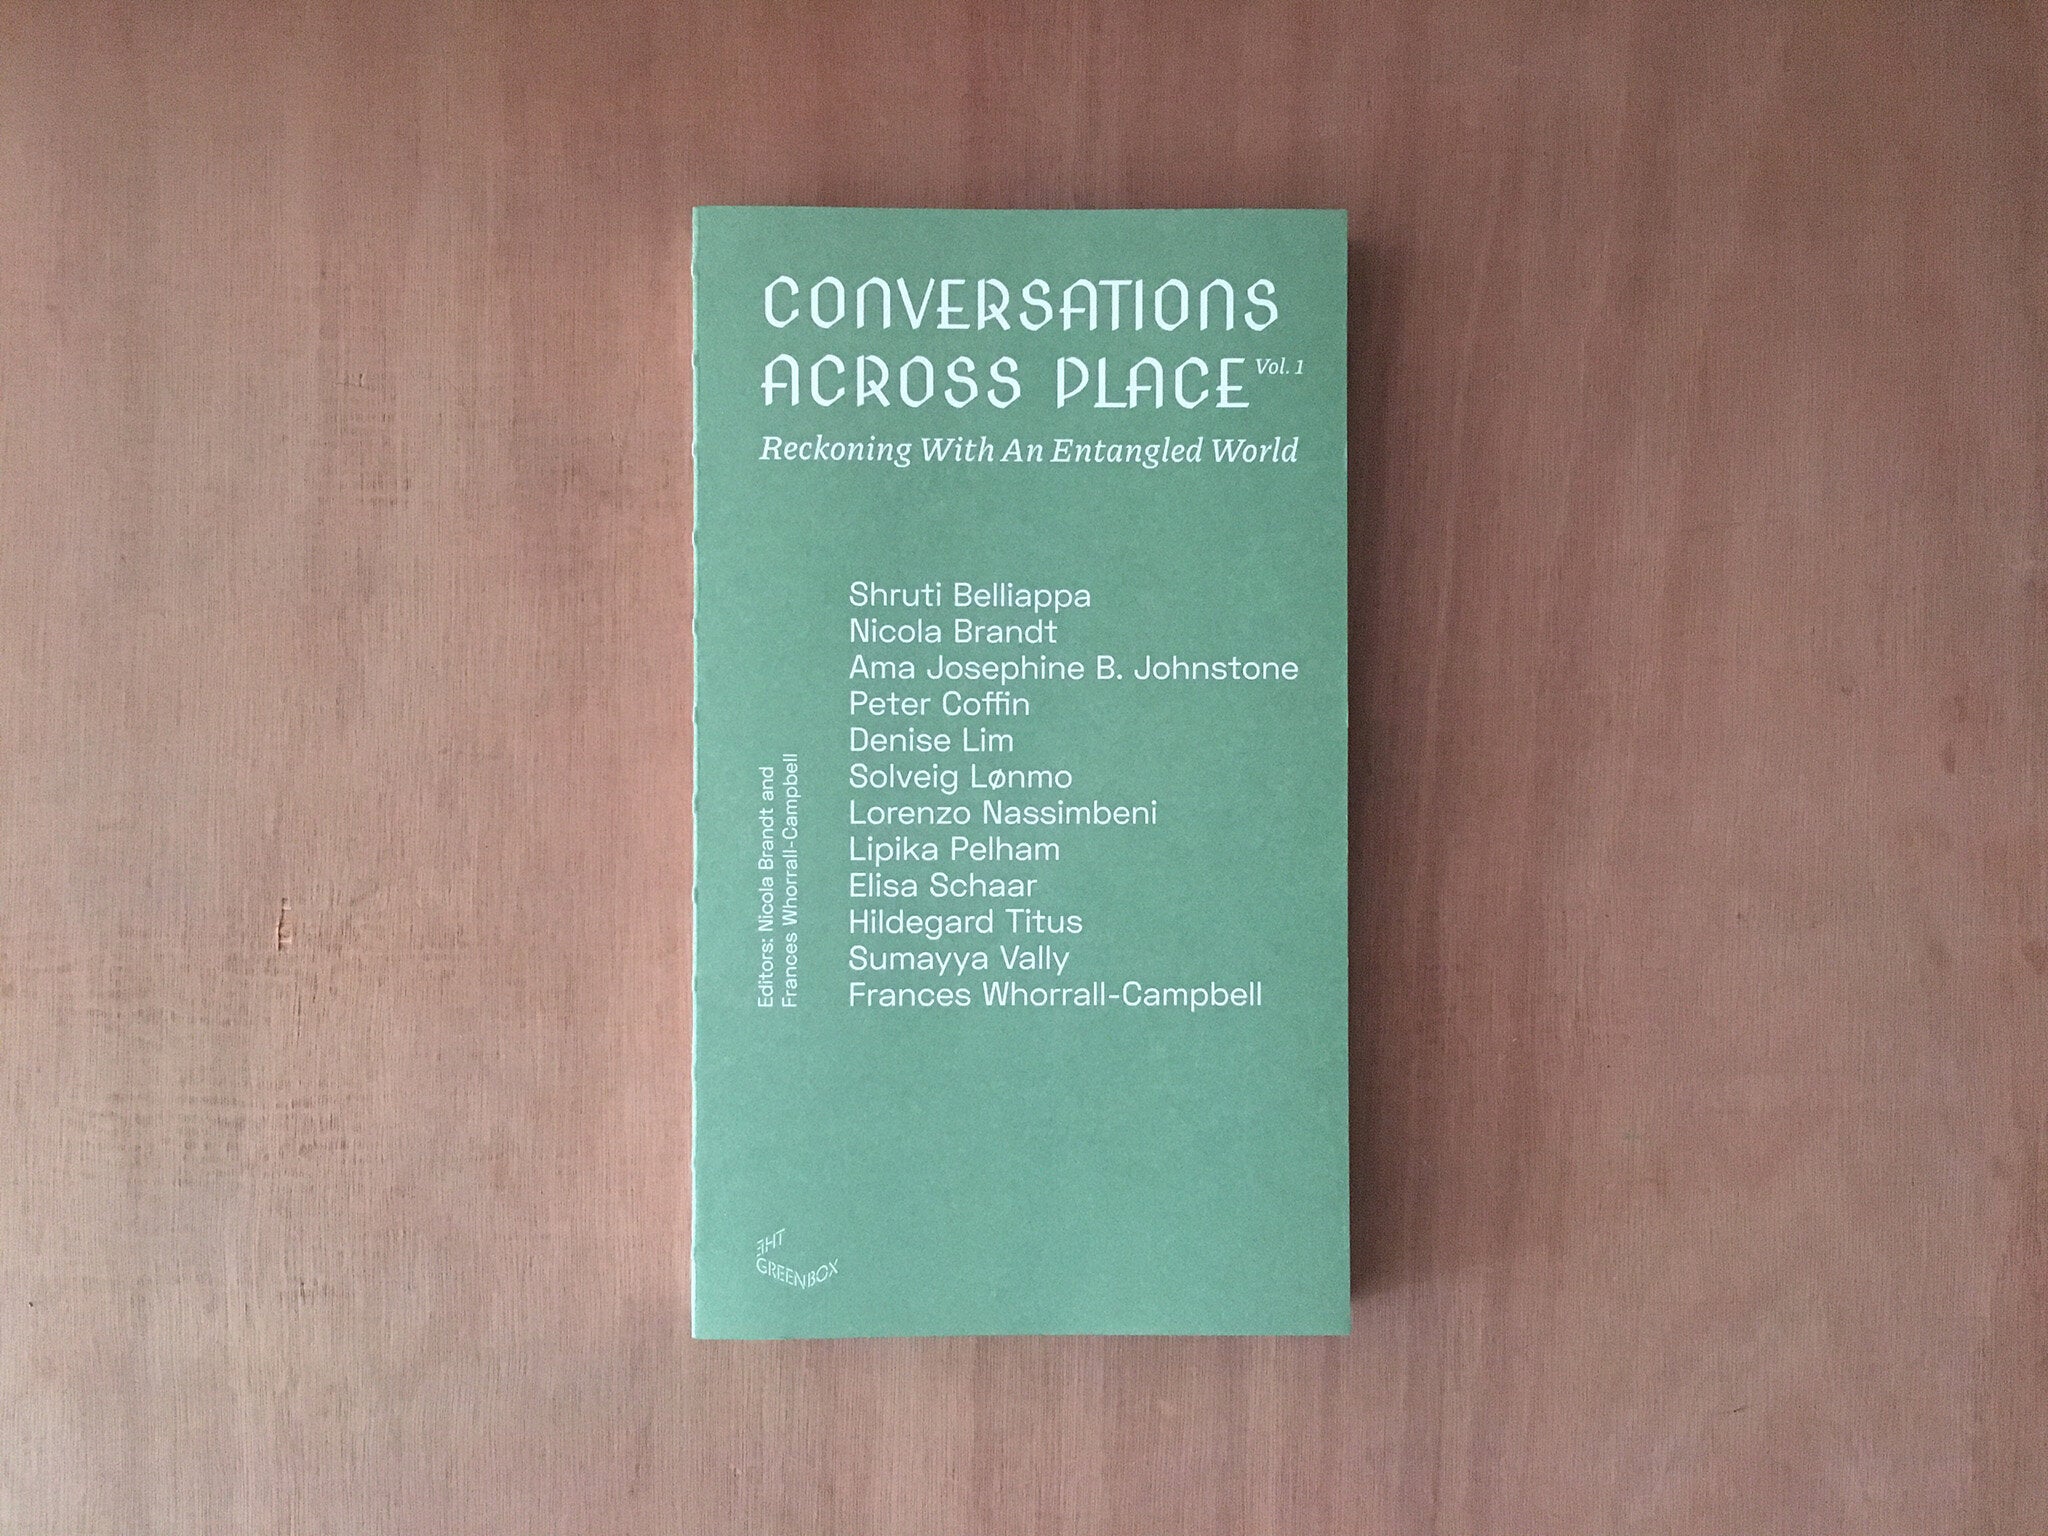 CONVERSATIONS ACROSS PLACE VOL.1 RECKONING WITH AN ENTANGLED WORLD